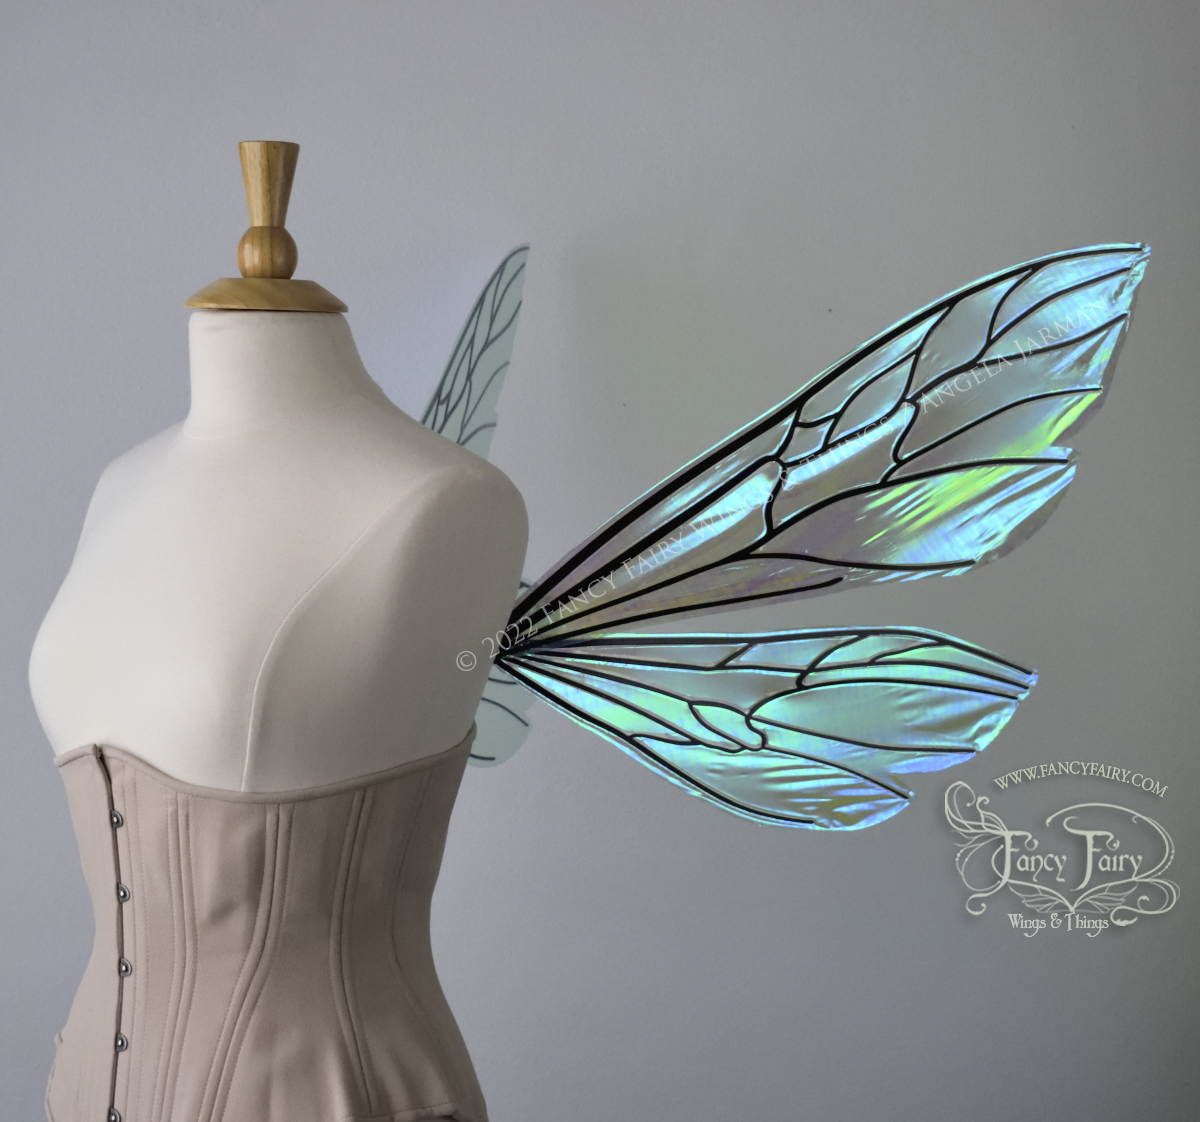 Ellette Convertible Iridescent Fairy Wings in Absinthe with black veins